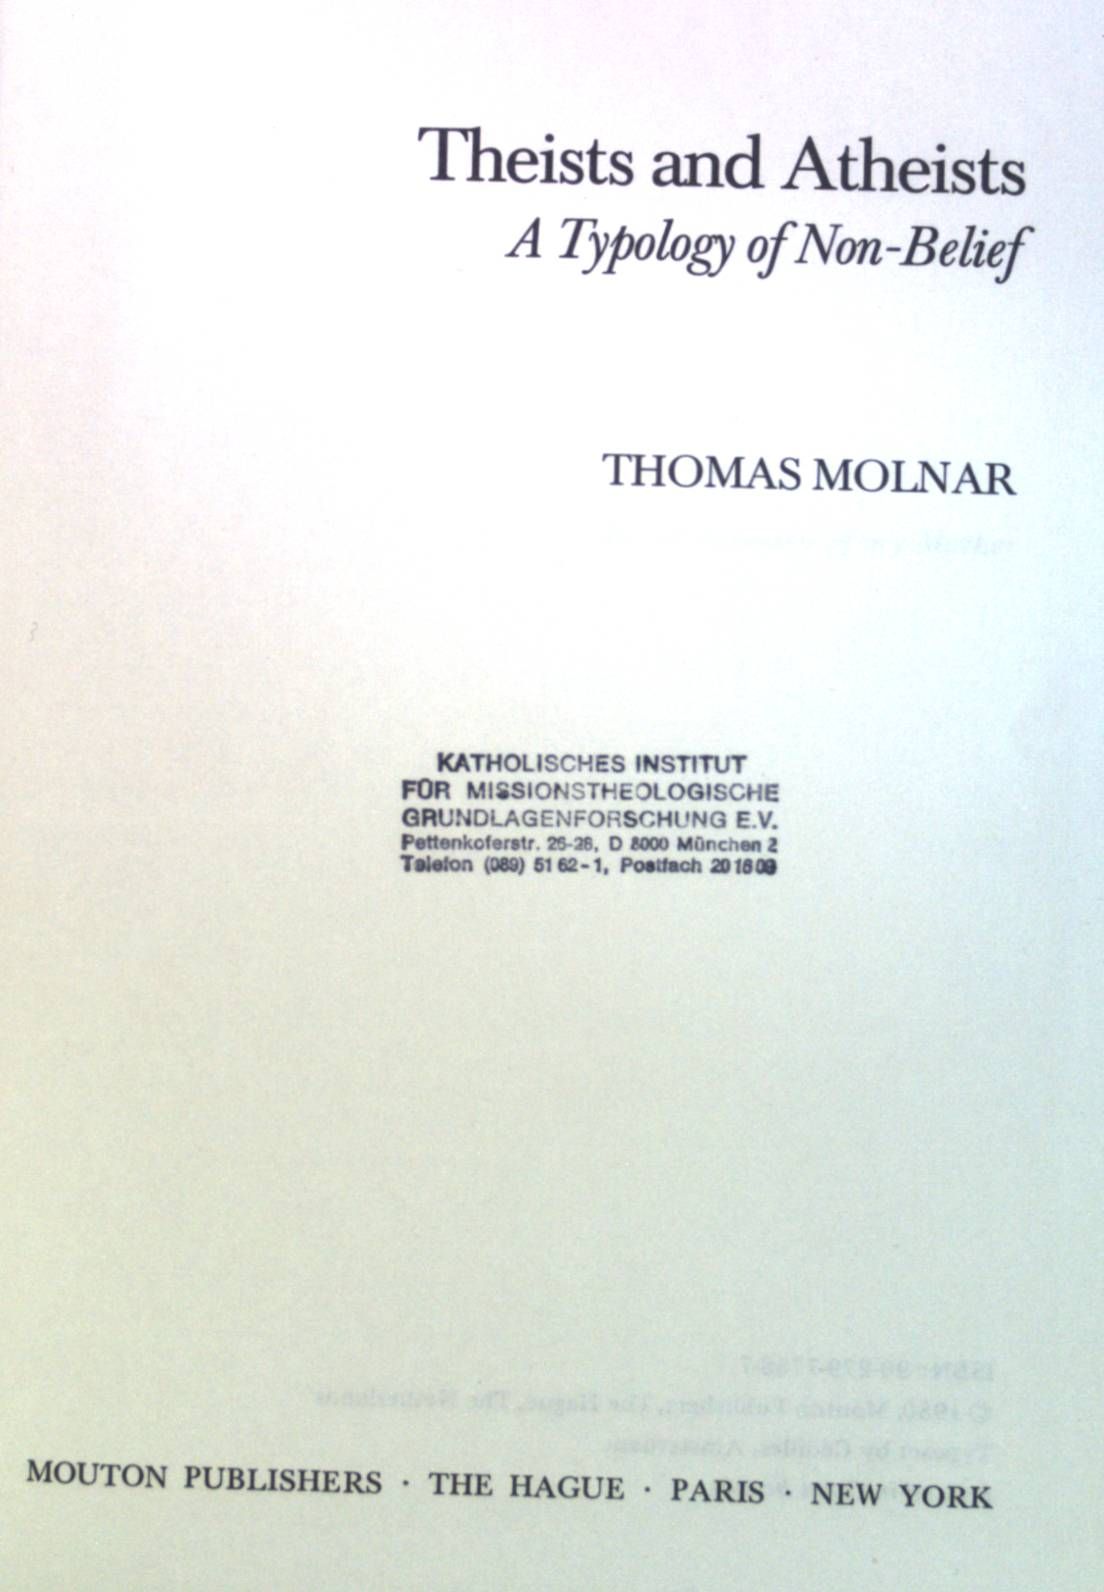 Theists and Atheists: A Typology of Non-Belief. Religion and Reason, Band 18 - Molnar, Thomas